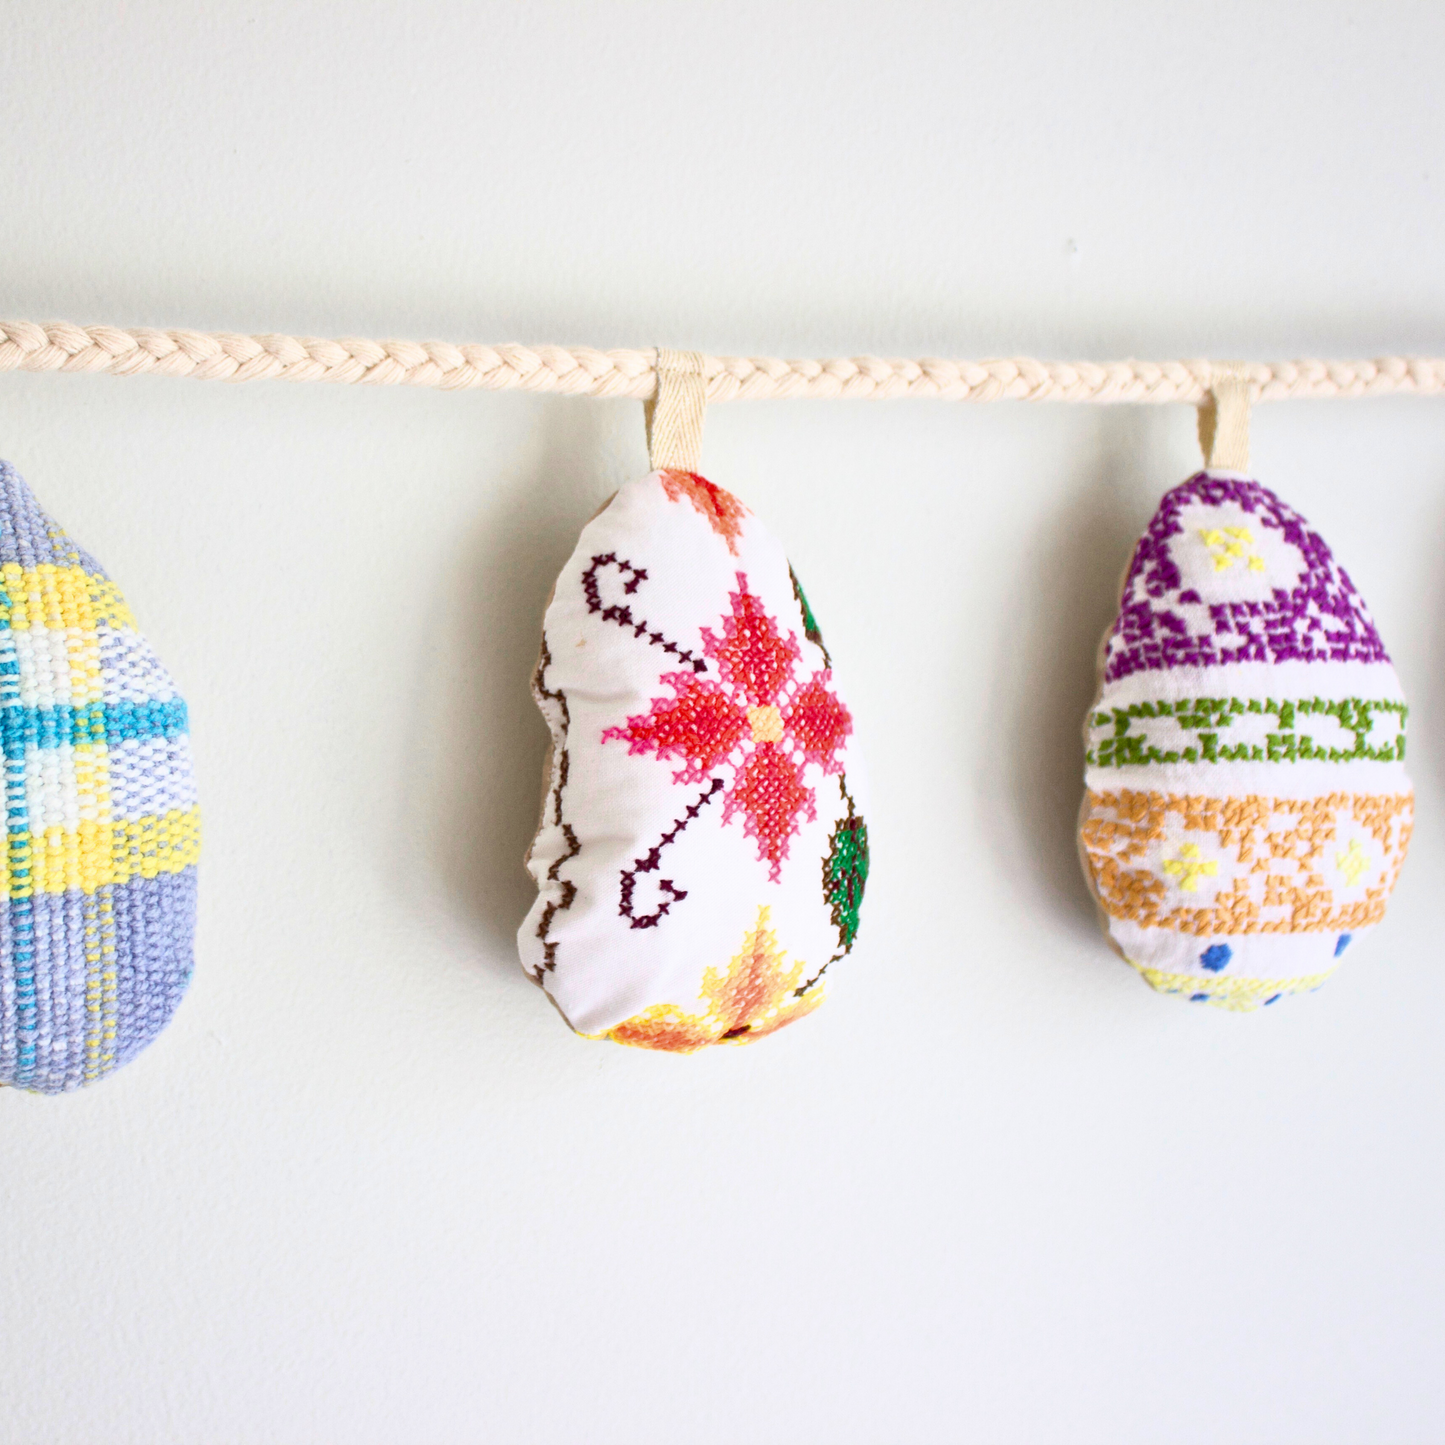 No. 1: Upcycled Pysanky Easter Egg Banner